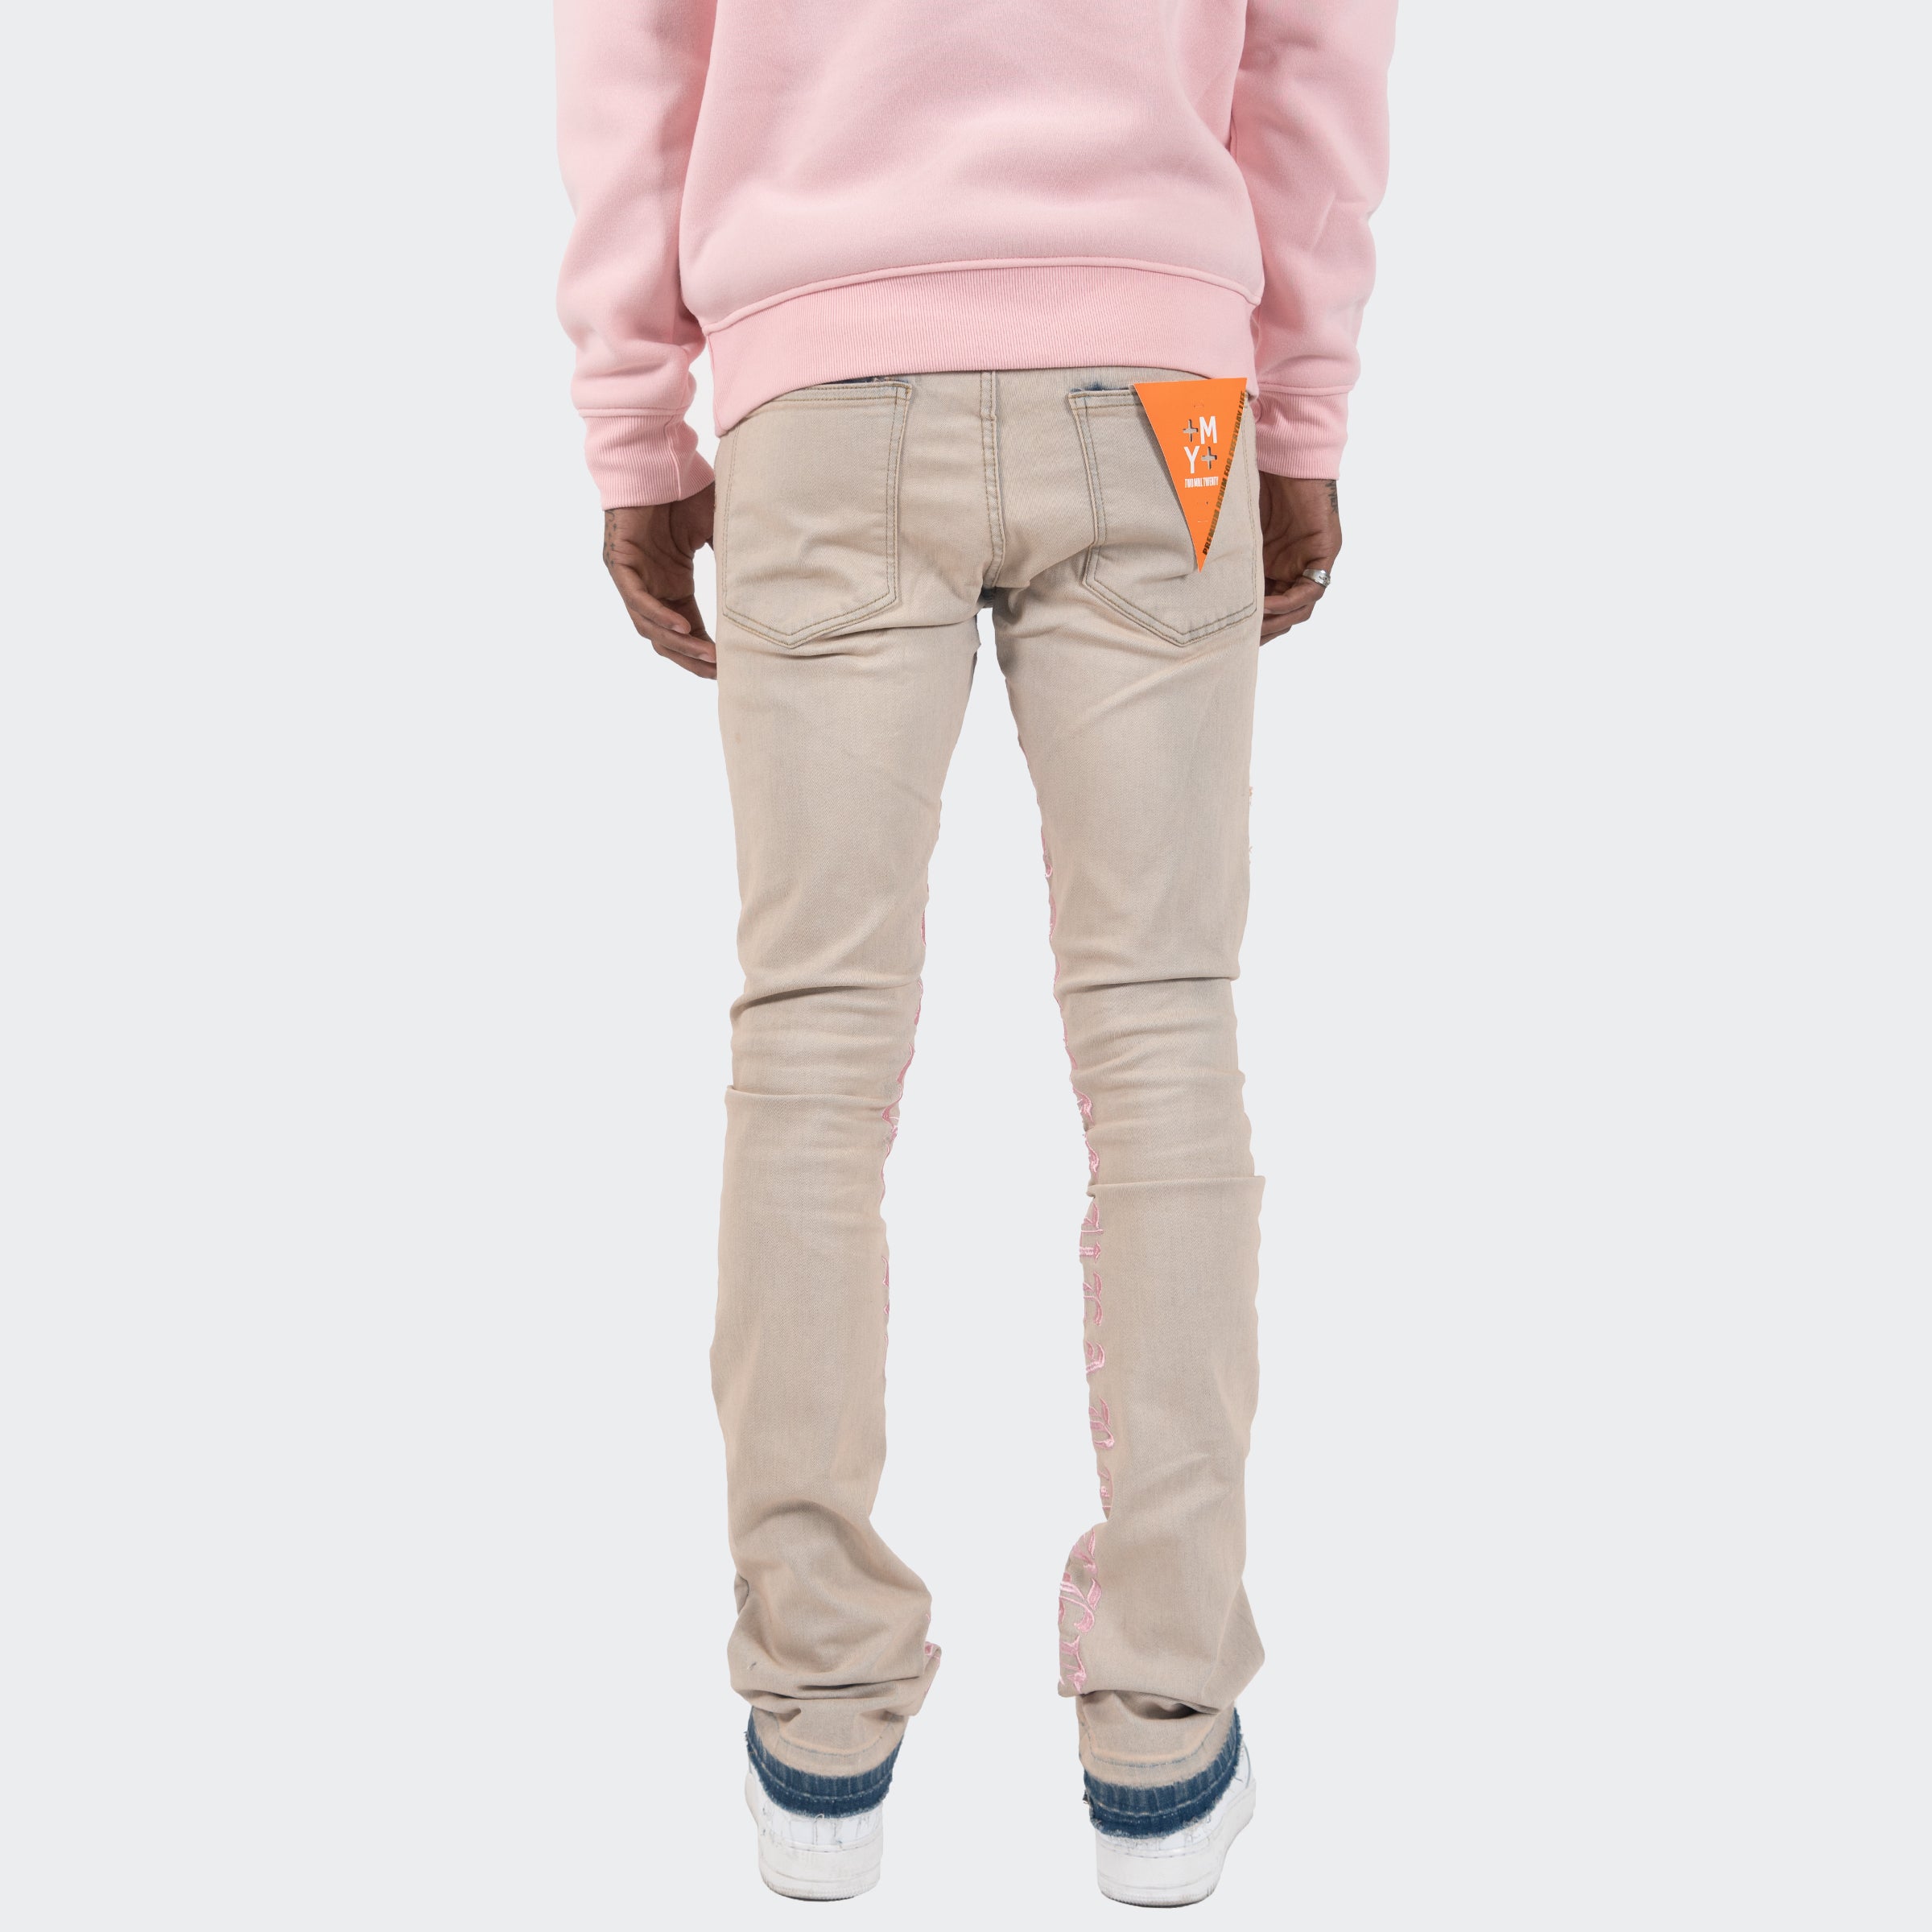 Stacked Joggers RESTOCKED in pink & multiple other colors